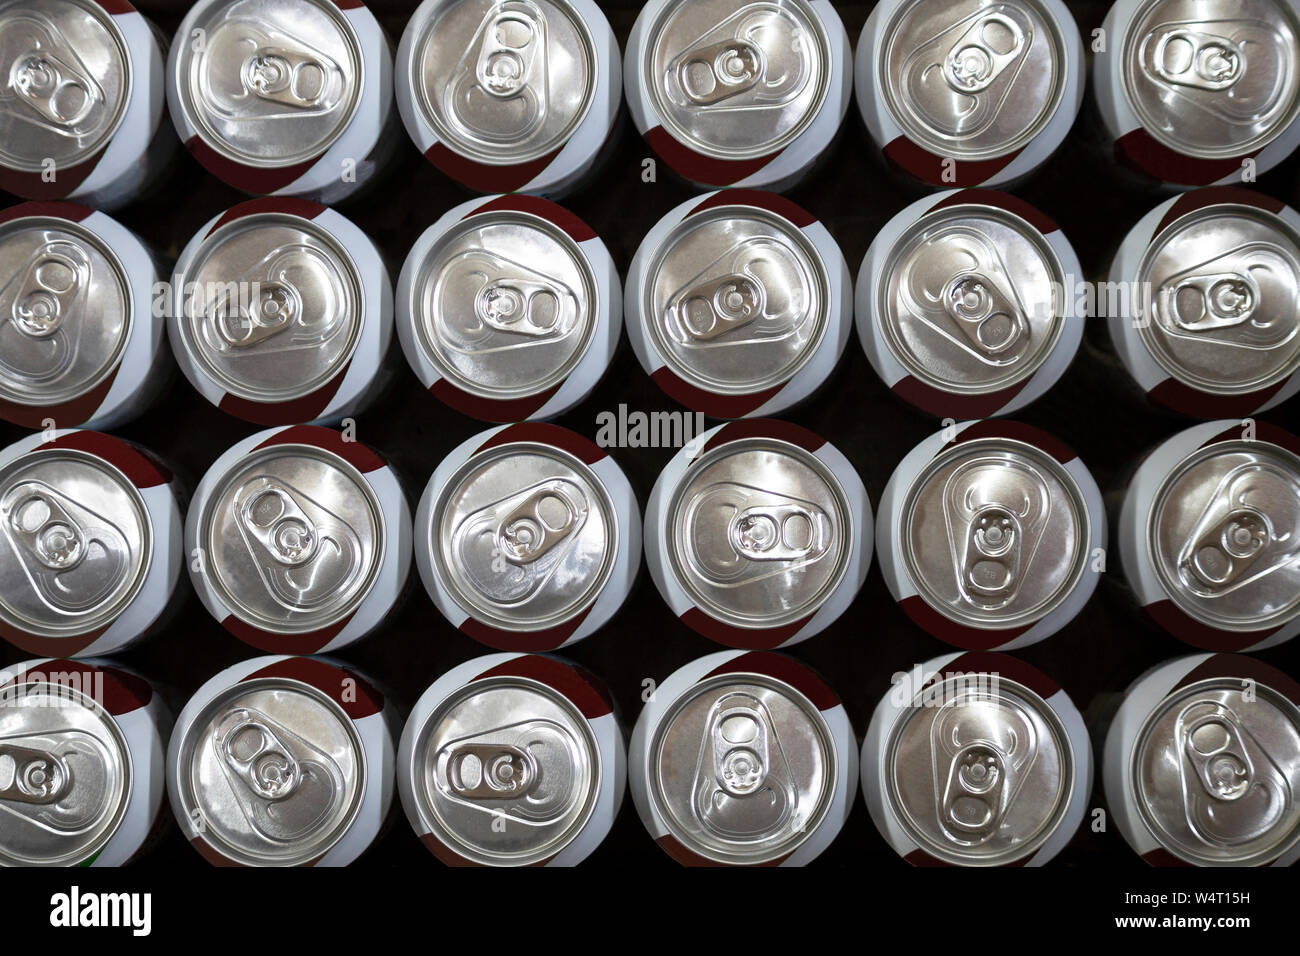 Overhead view of soft drink cans Stock Photo